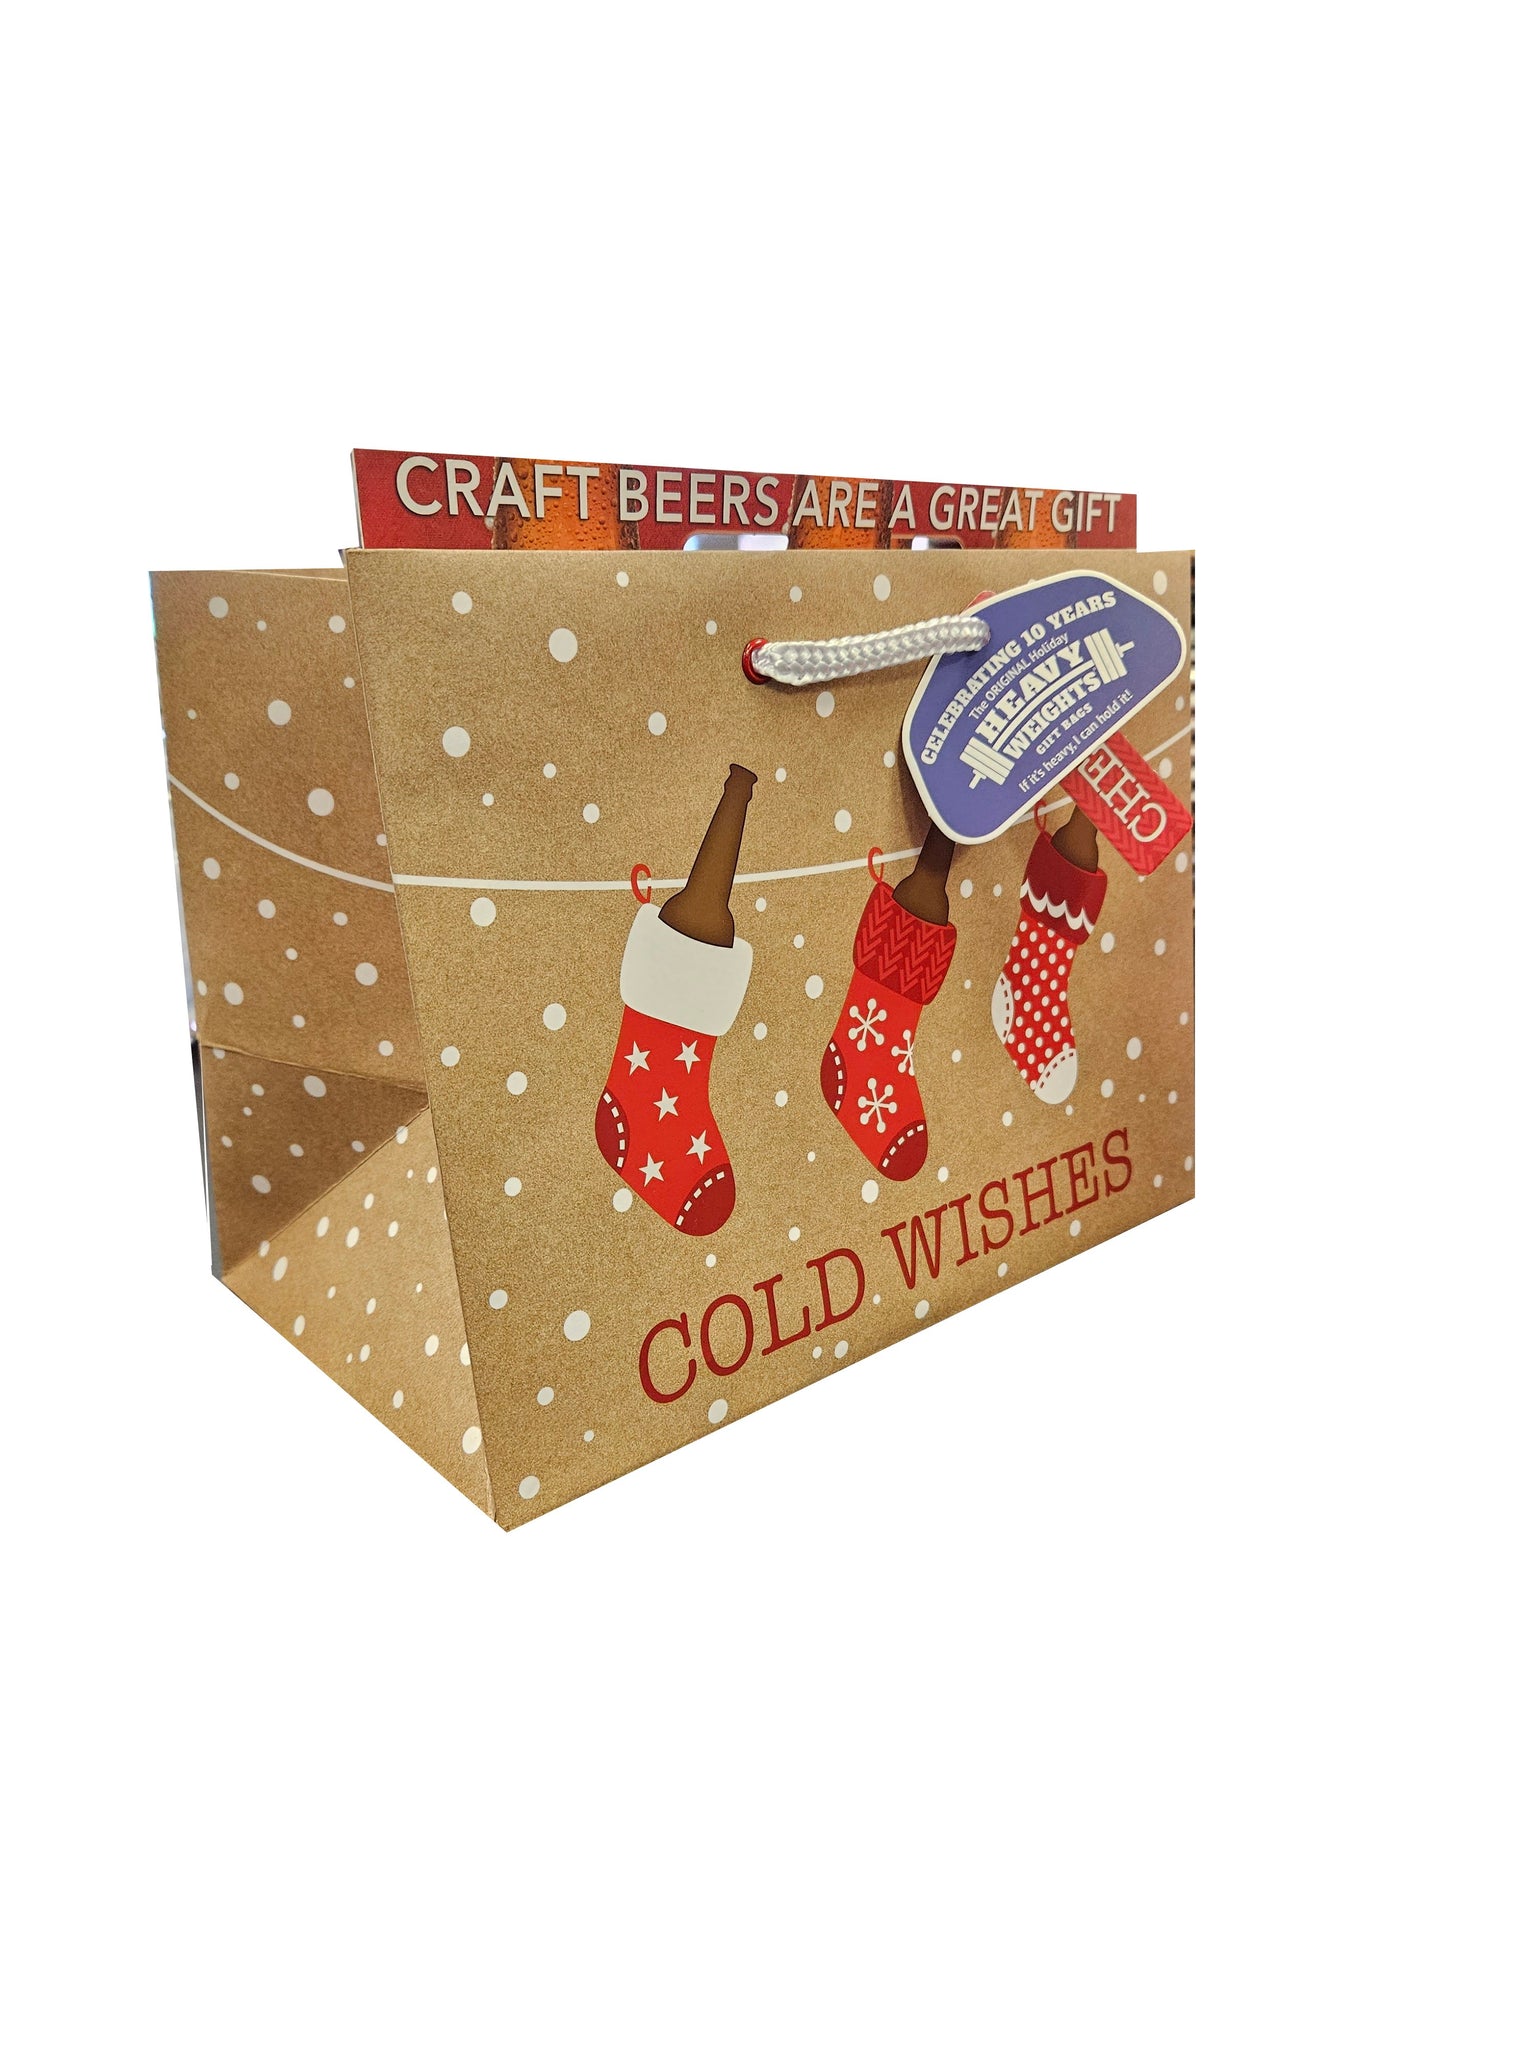 Holiday Craft Beer Gift Bag - Cold Wishes